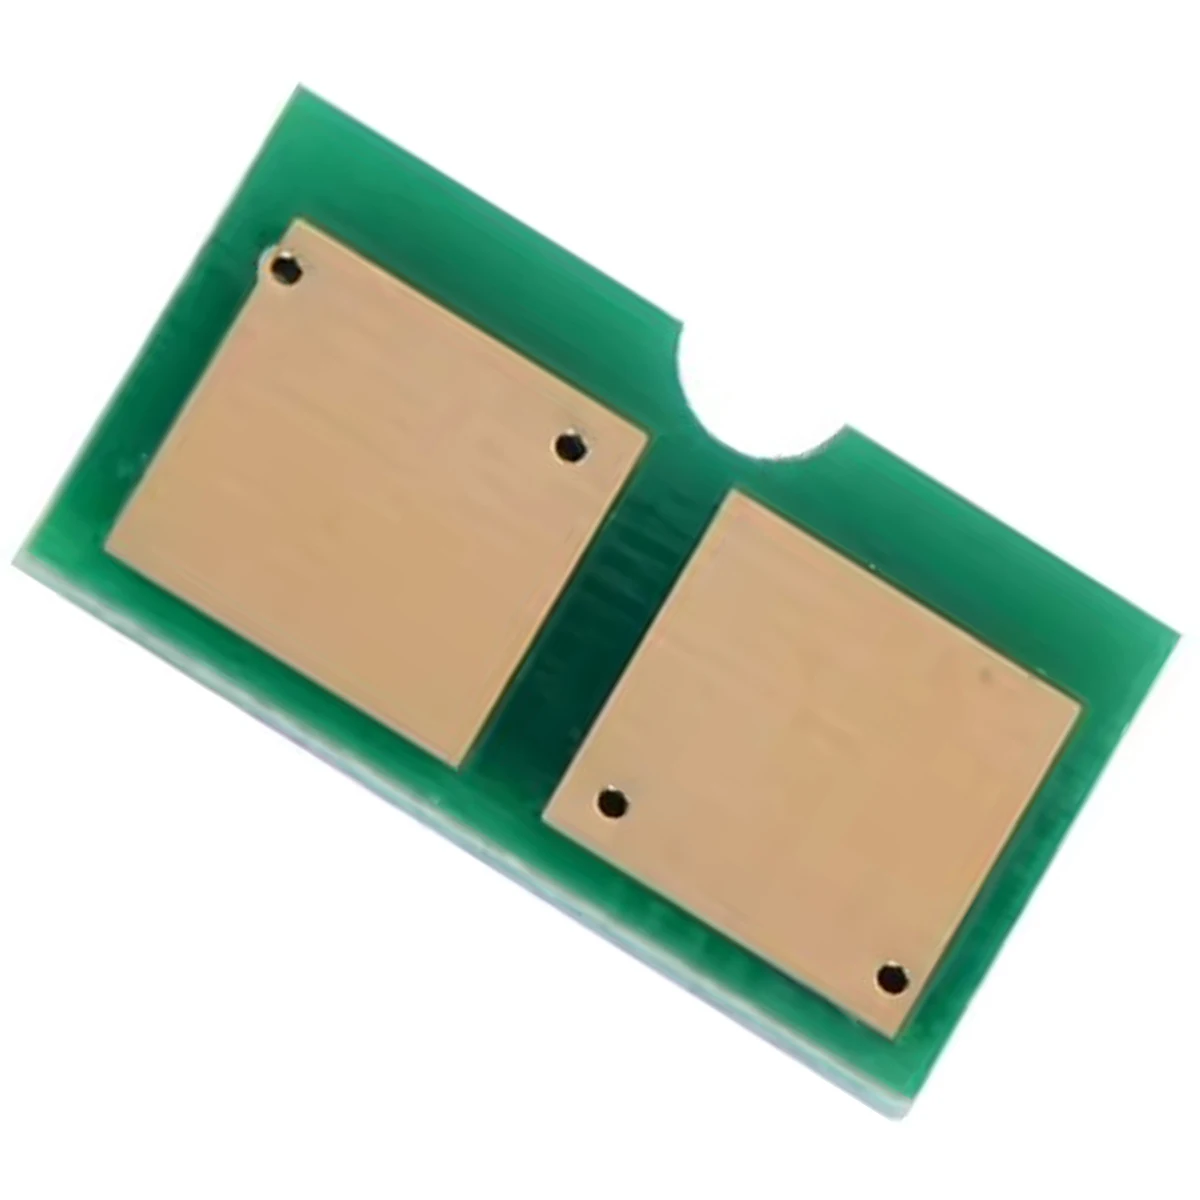 

Image Imaging Unit Drum Chip for Canon GPR30 DR NPG 45 DR TG 45 DR GPR 30 DR C-EXV28 IU CEXV28 IU C EXV28 IU C-EXV-28 IU